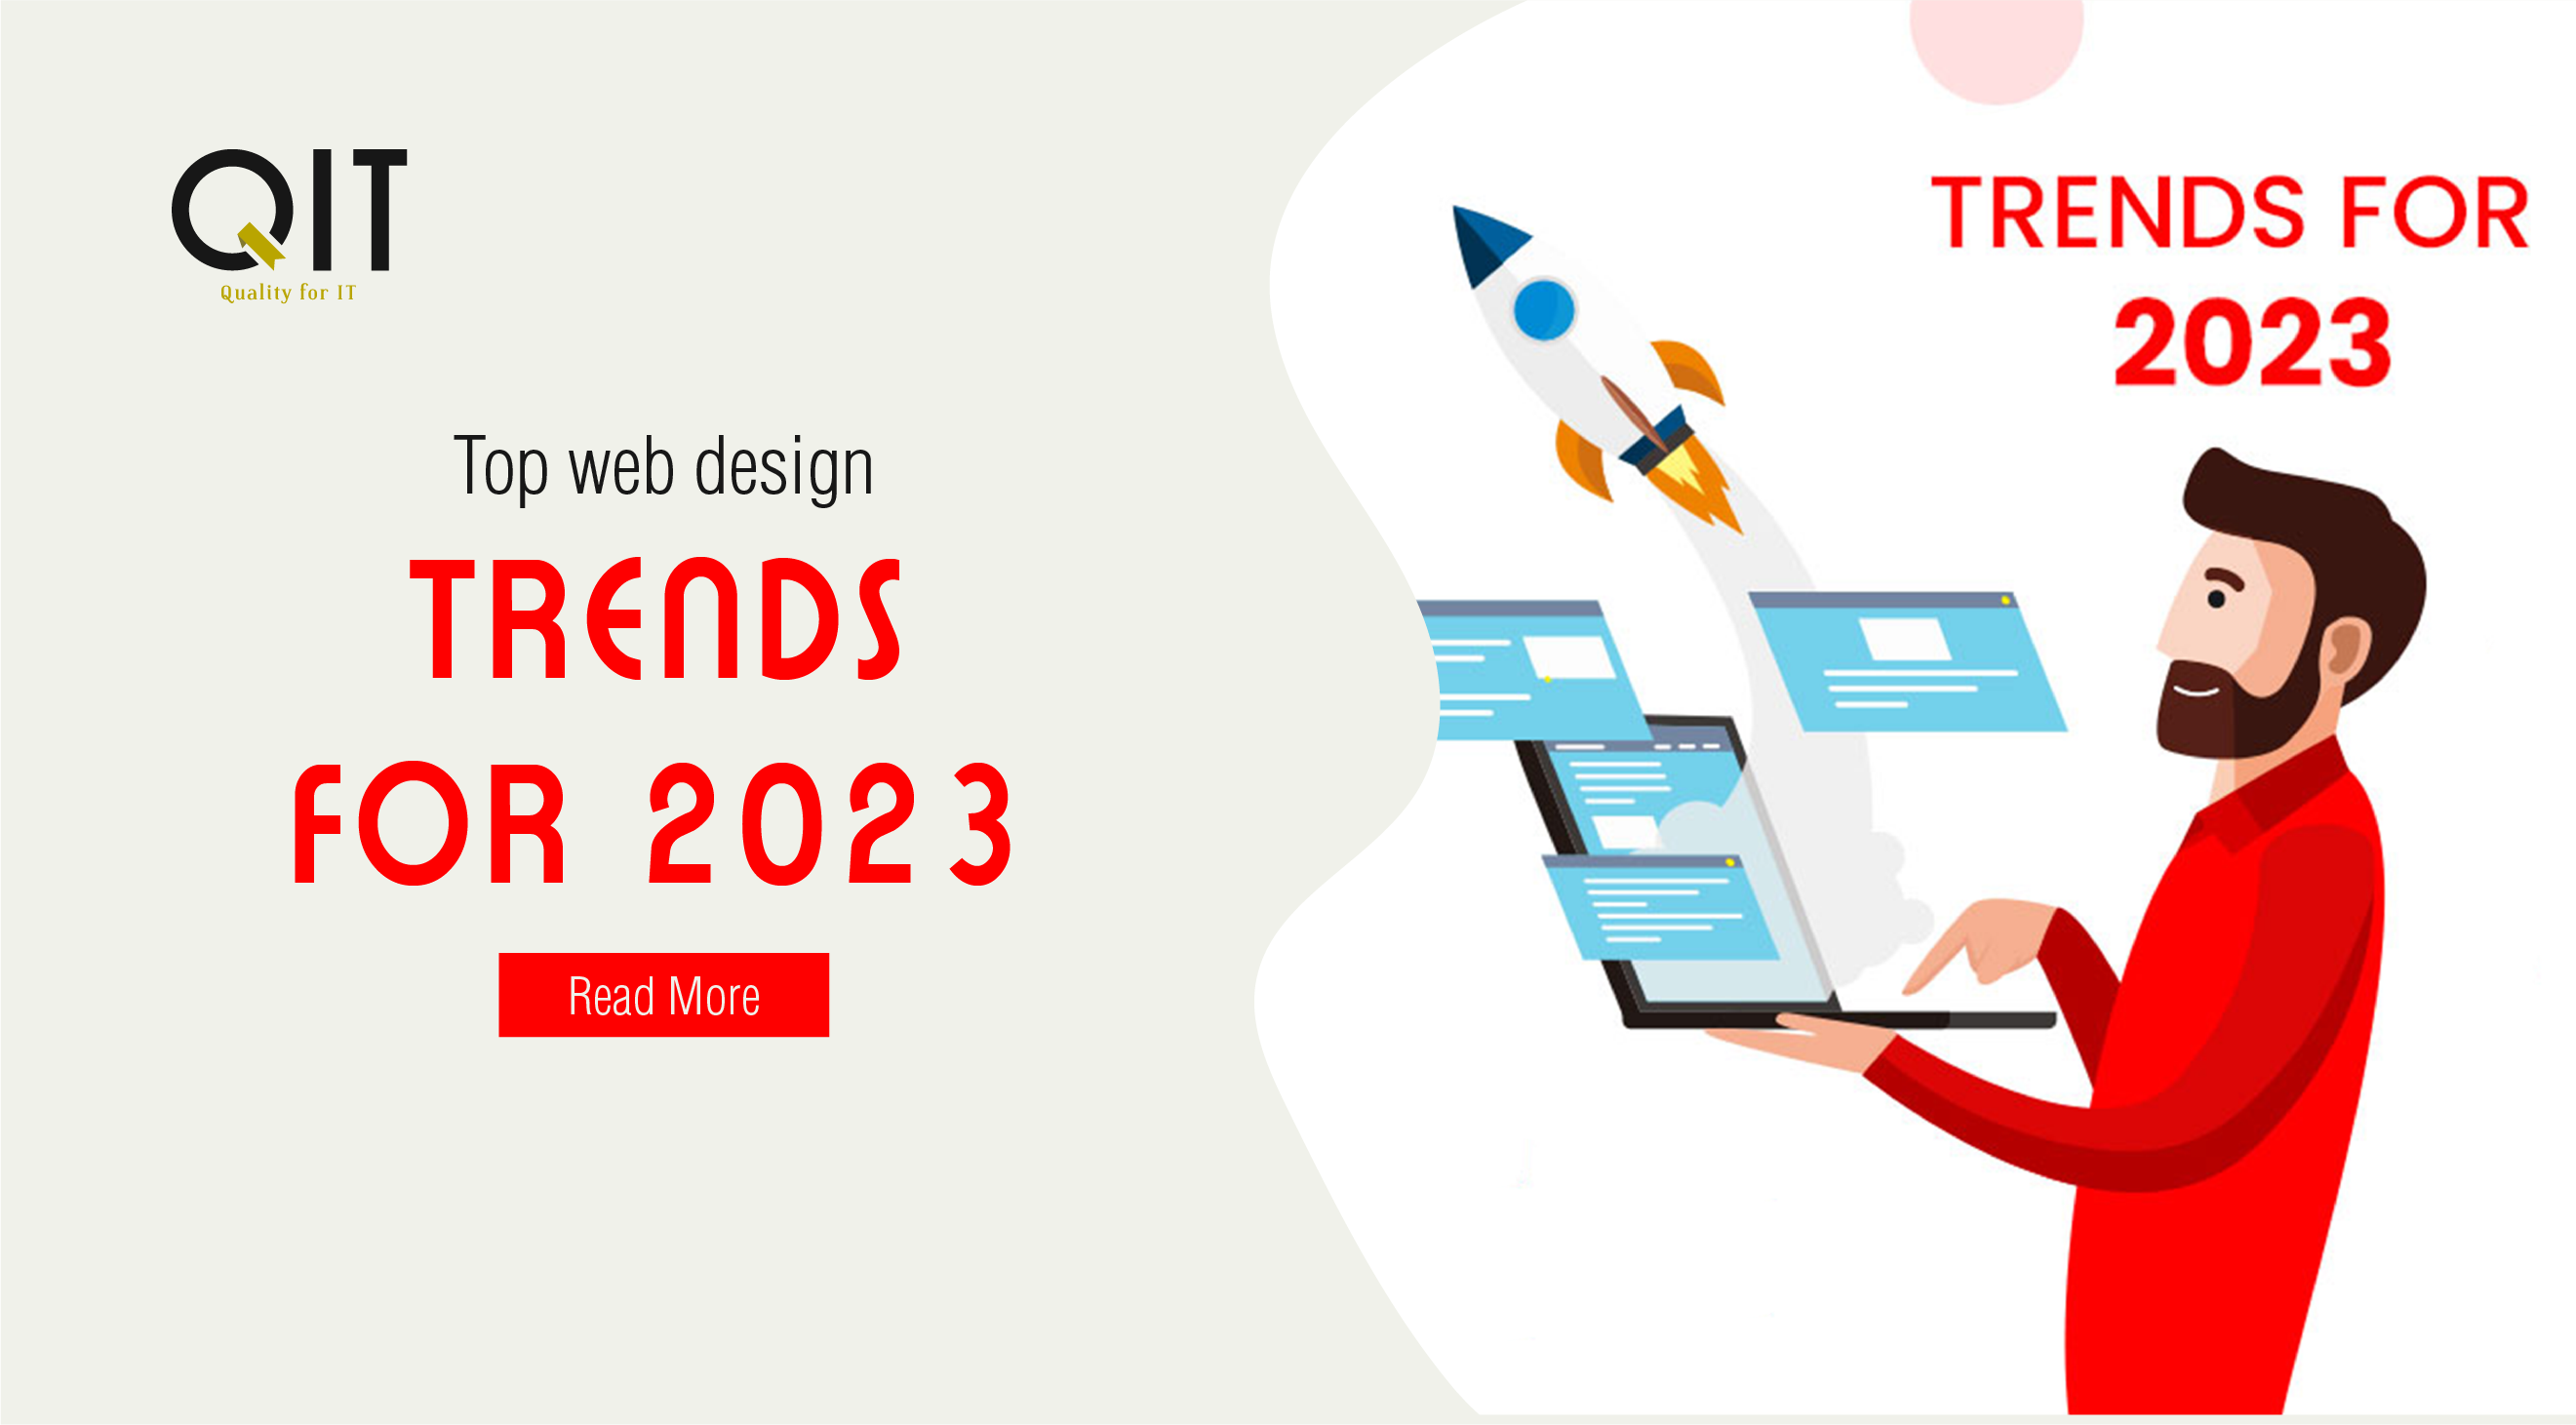 Top web design trends for 2023